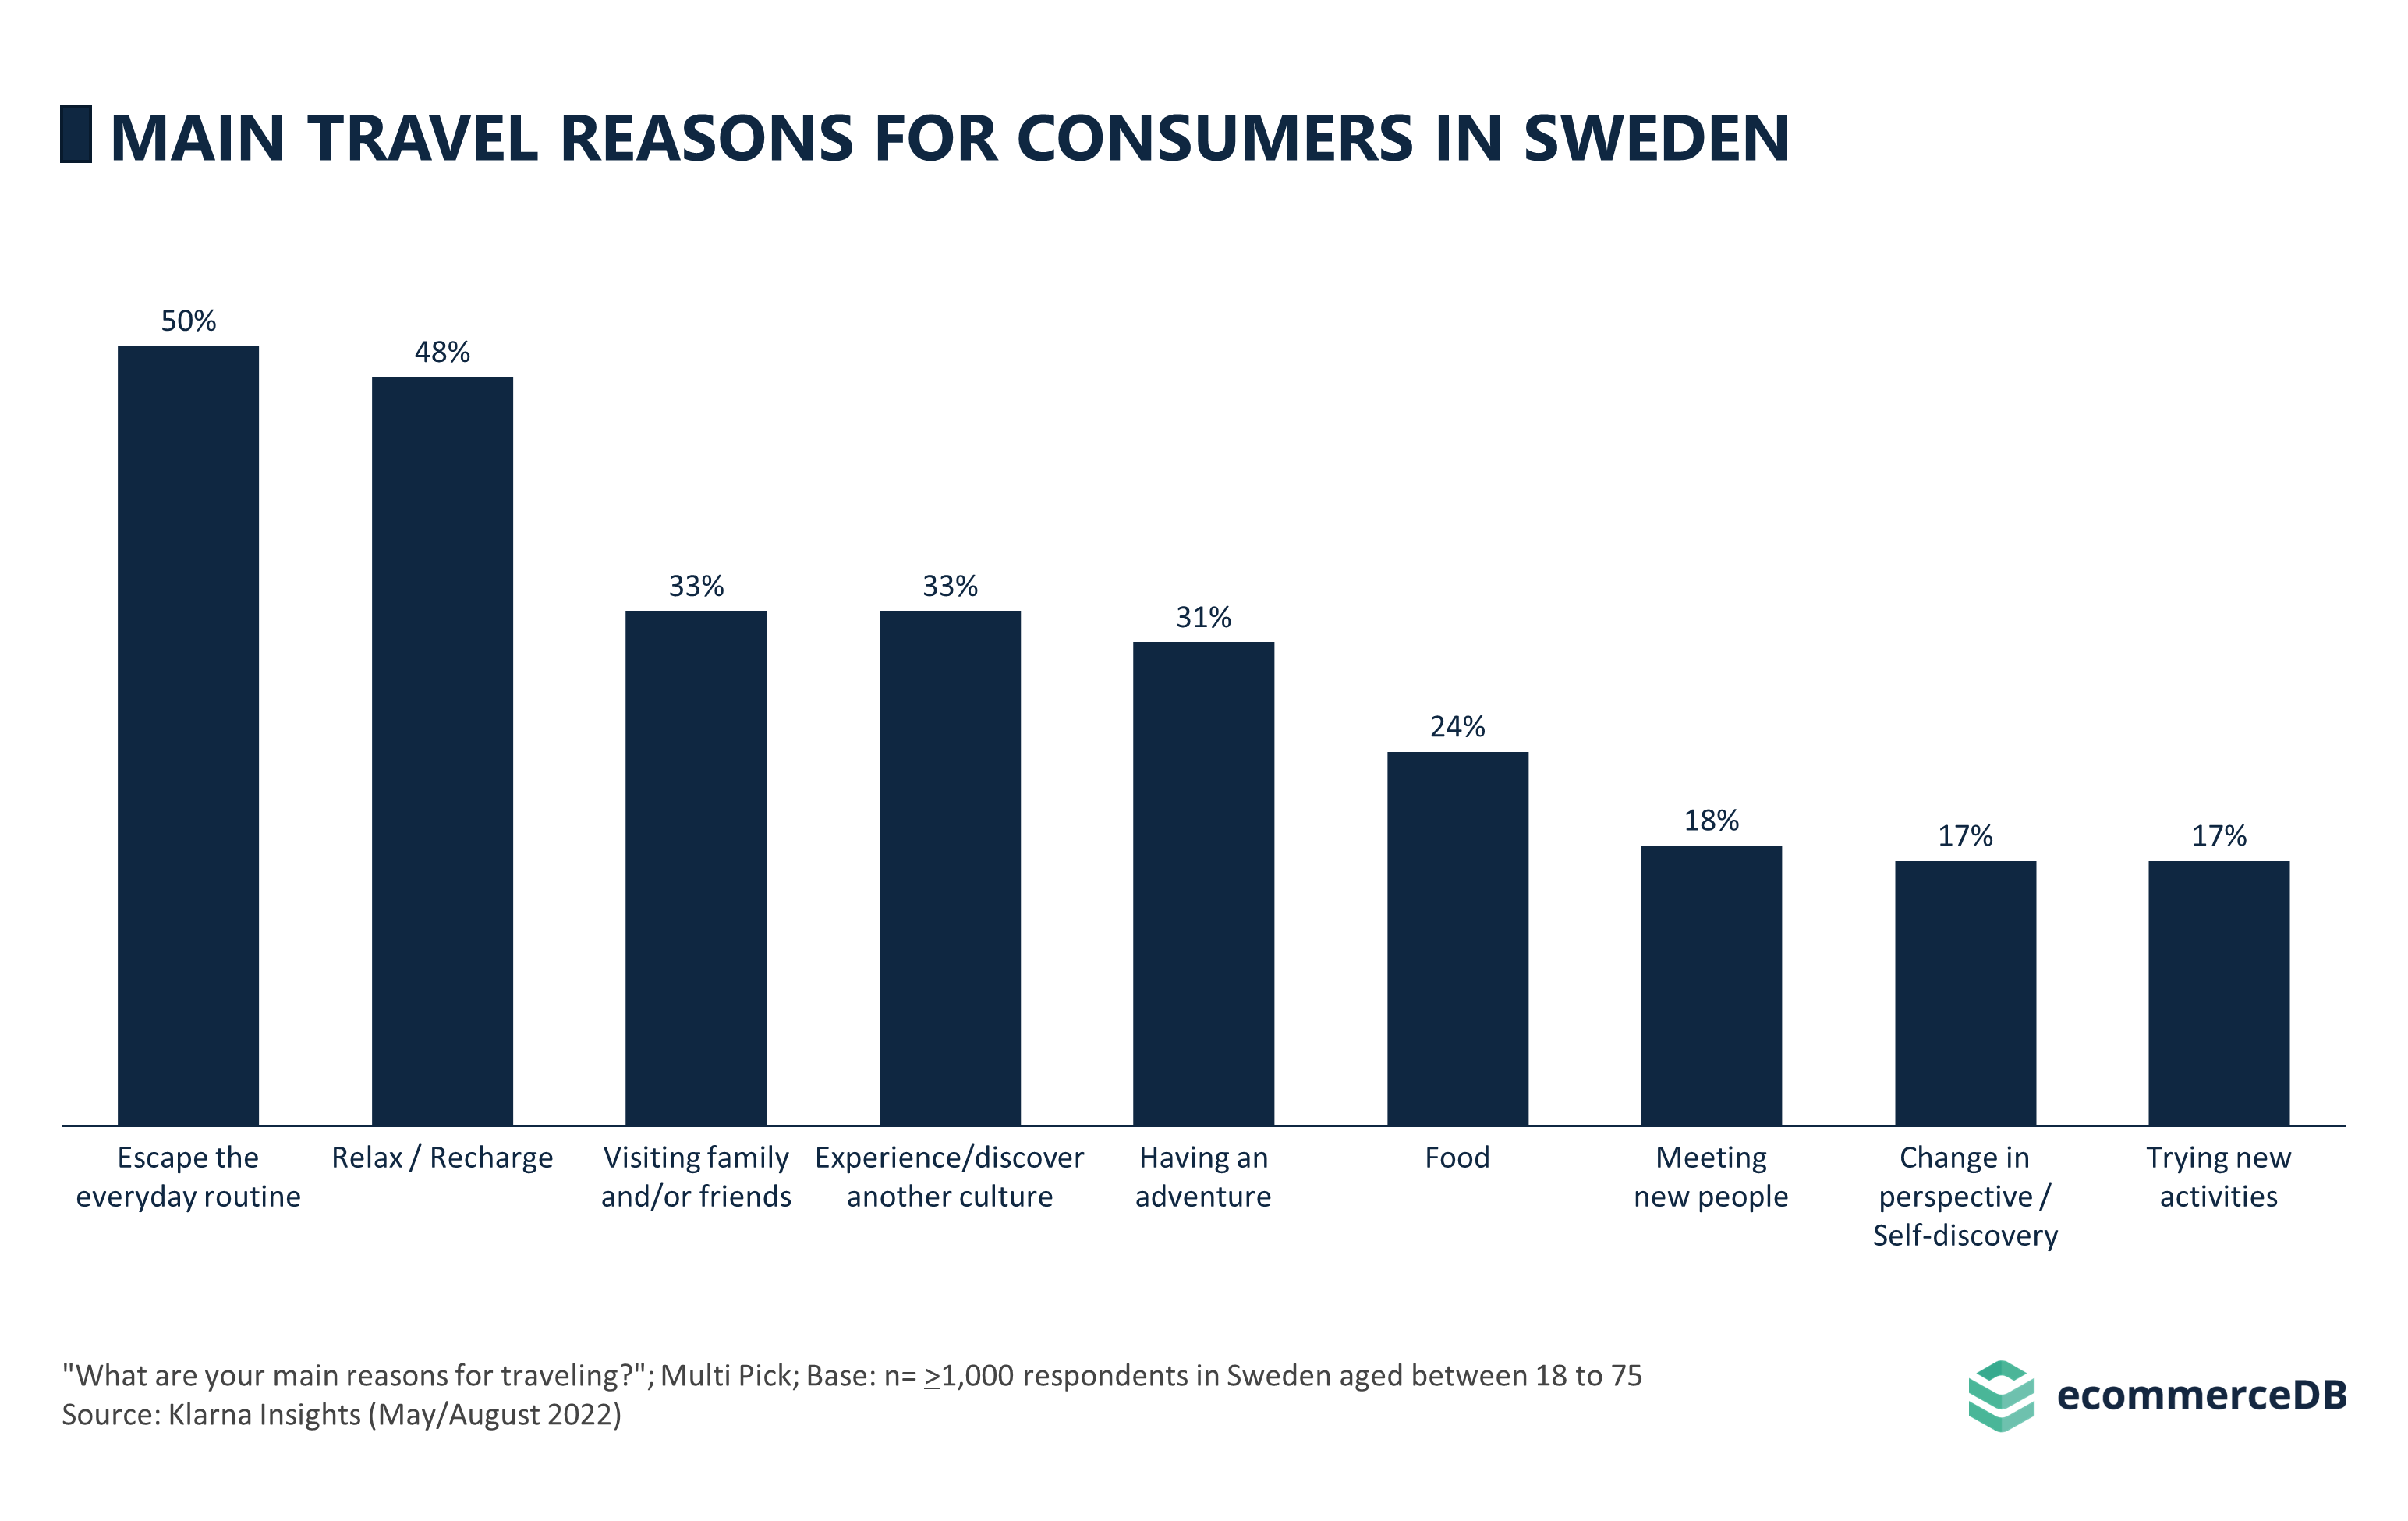 Main Travel Reasons for Consumers in Sweden